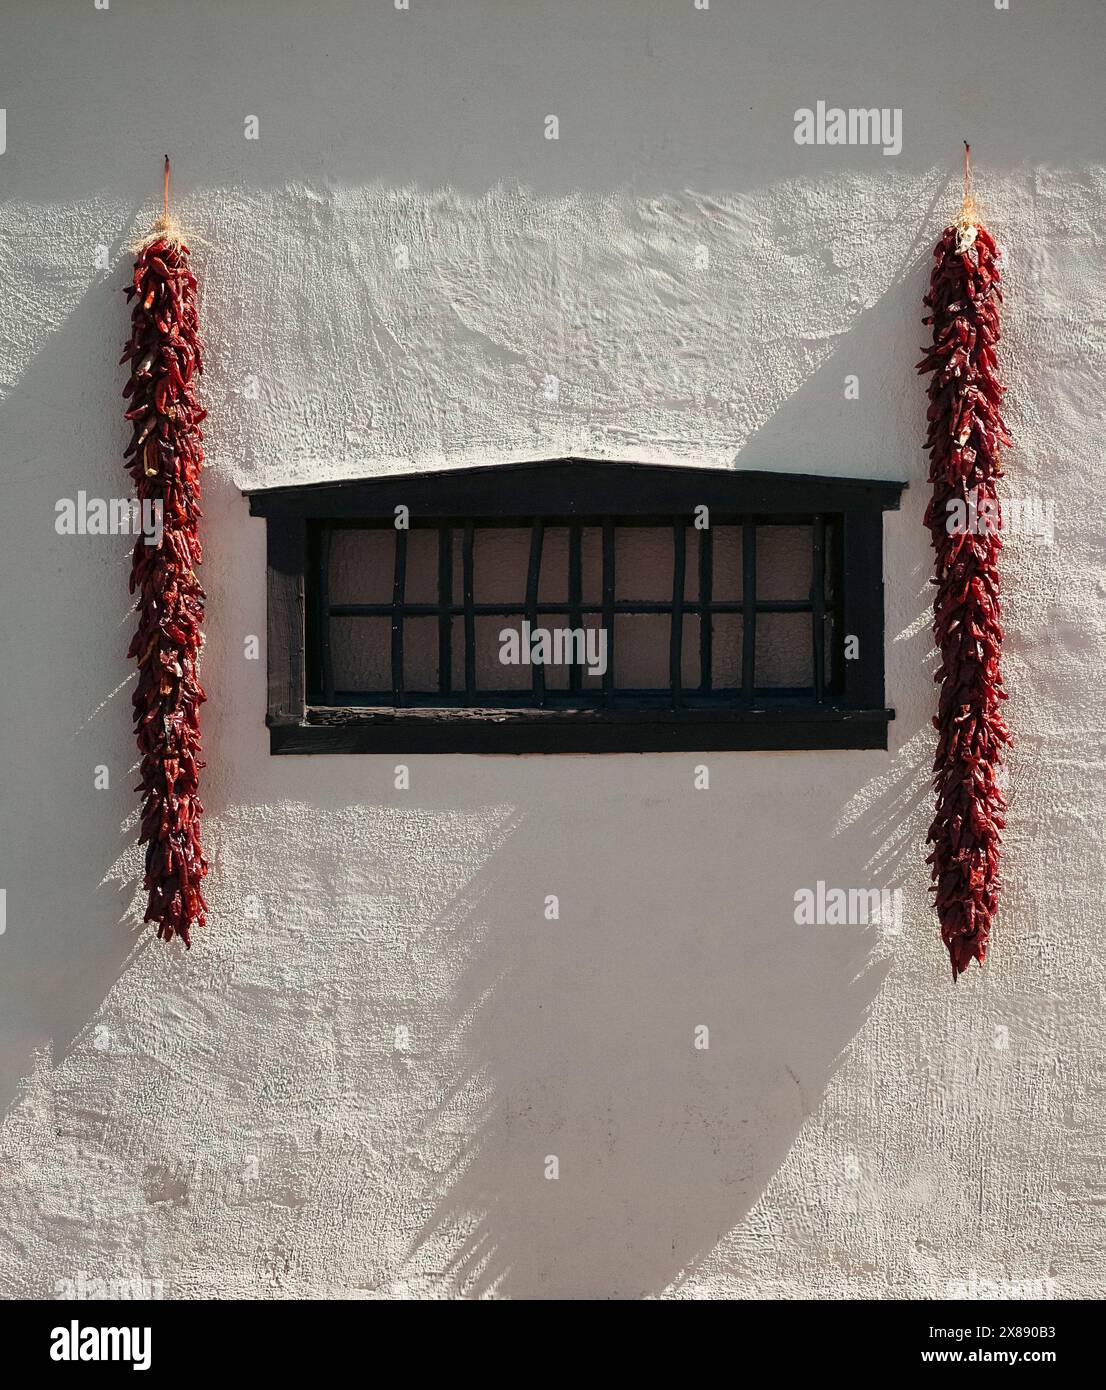 Side lighting of red chili ristras hanging on white wall with black wooden window on exterior of traditional Southern New Mexican abode in Mesilla, NM Stock Photo